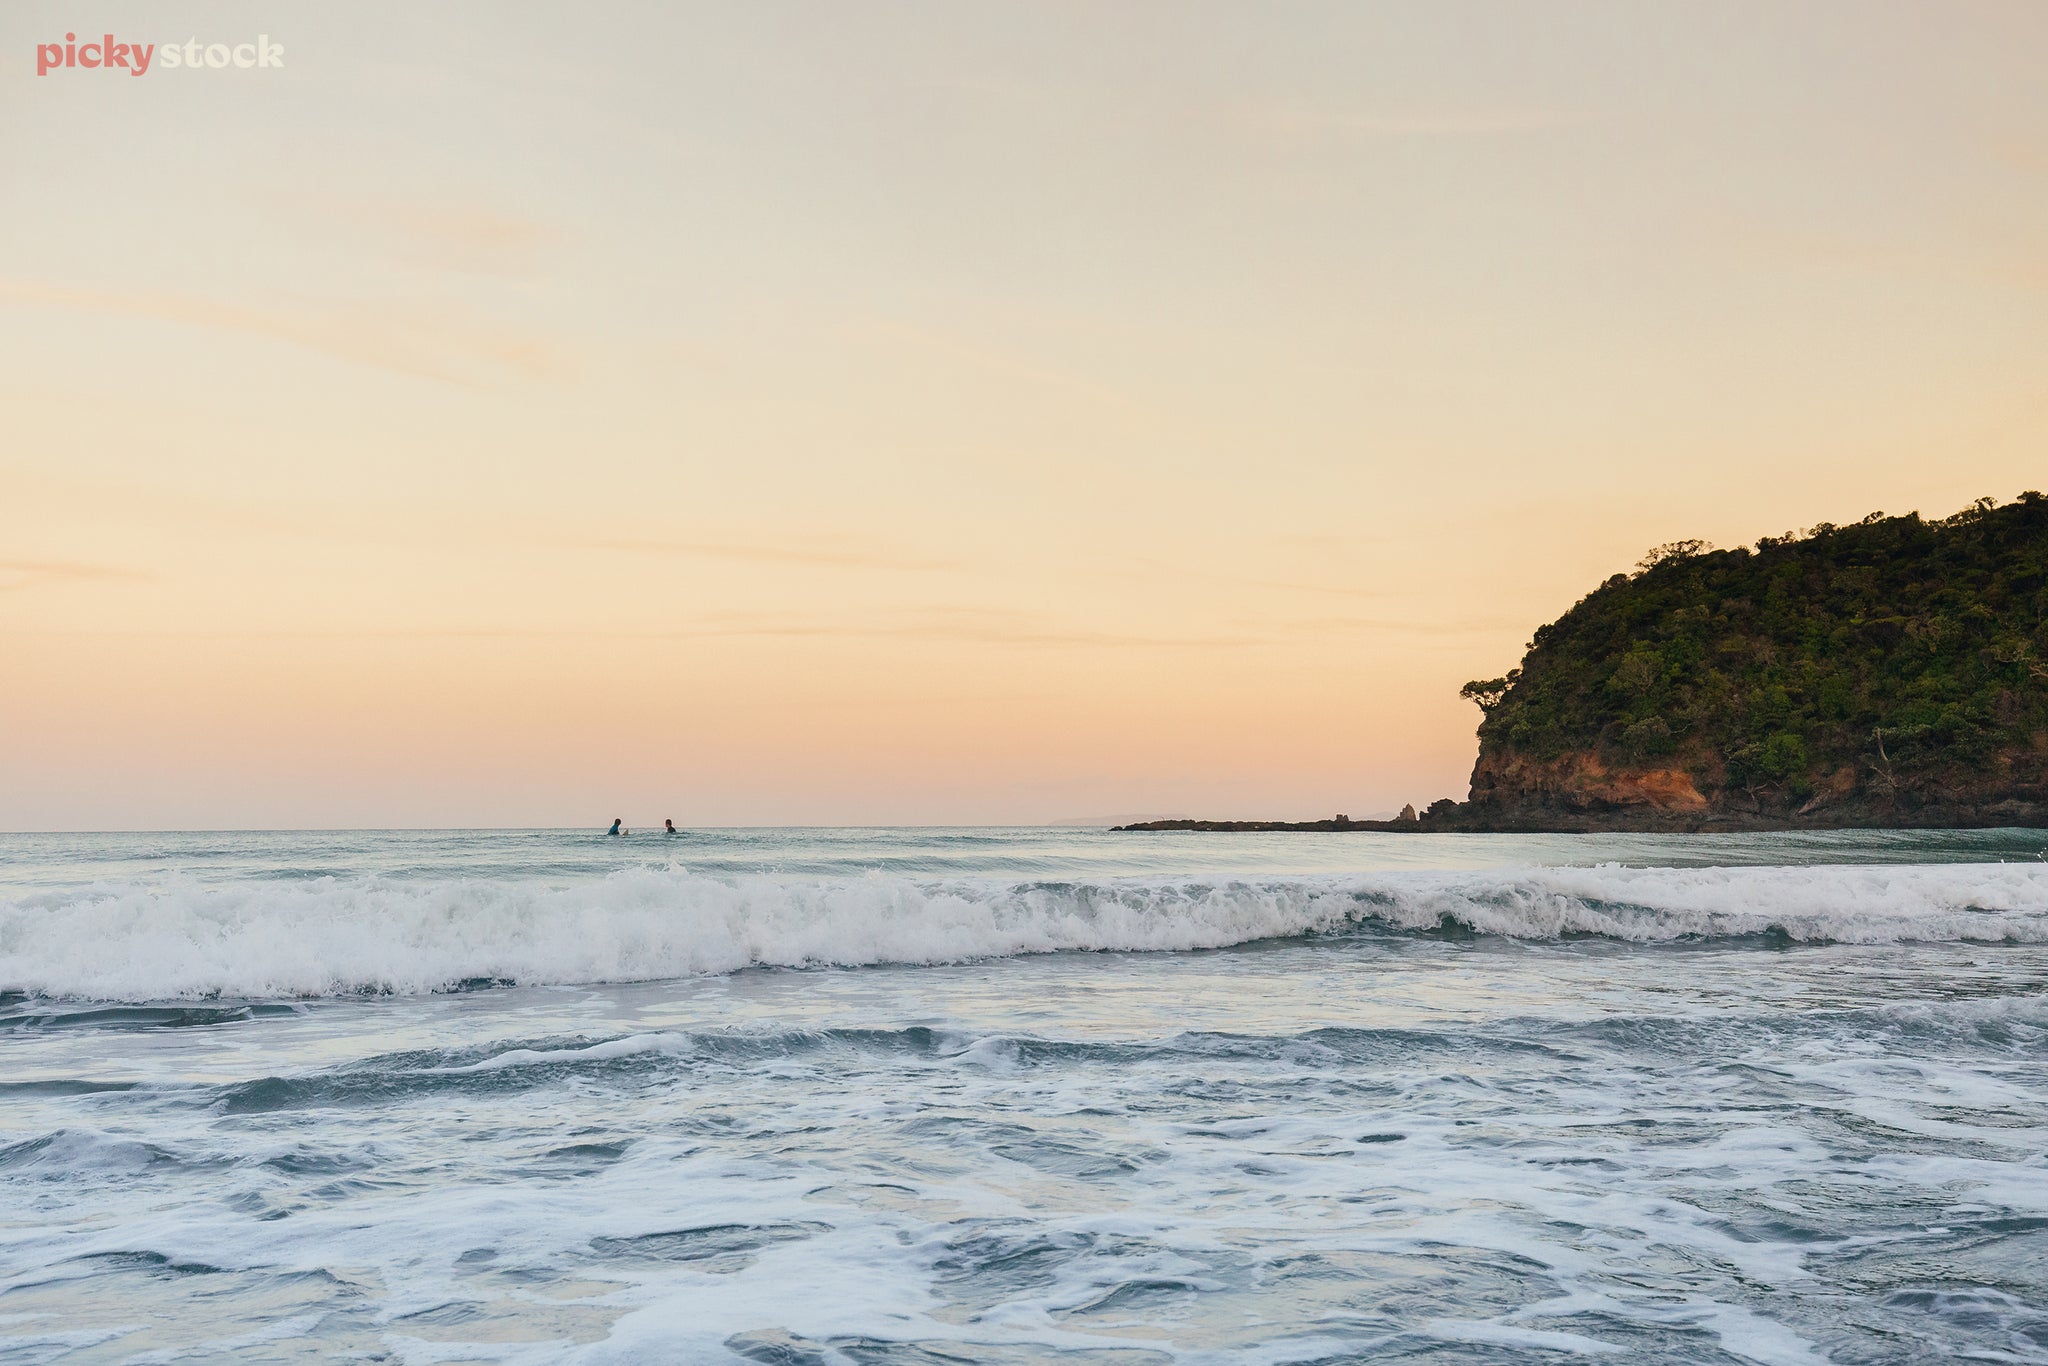 Landscape of two surfers waiting for a wave while small currents break against the shoreline under clear orange skies.